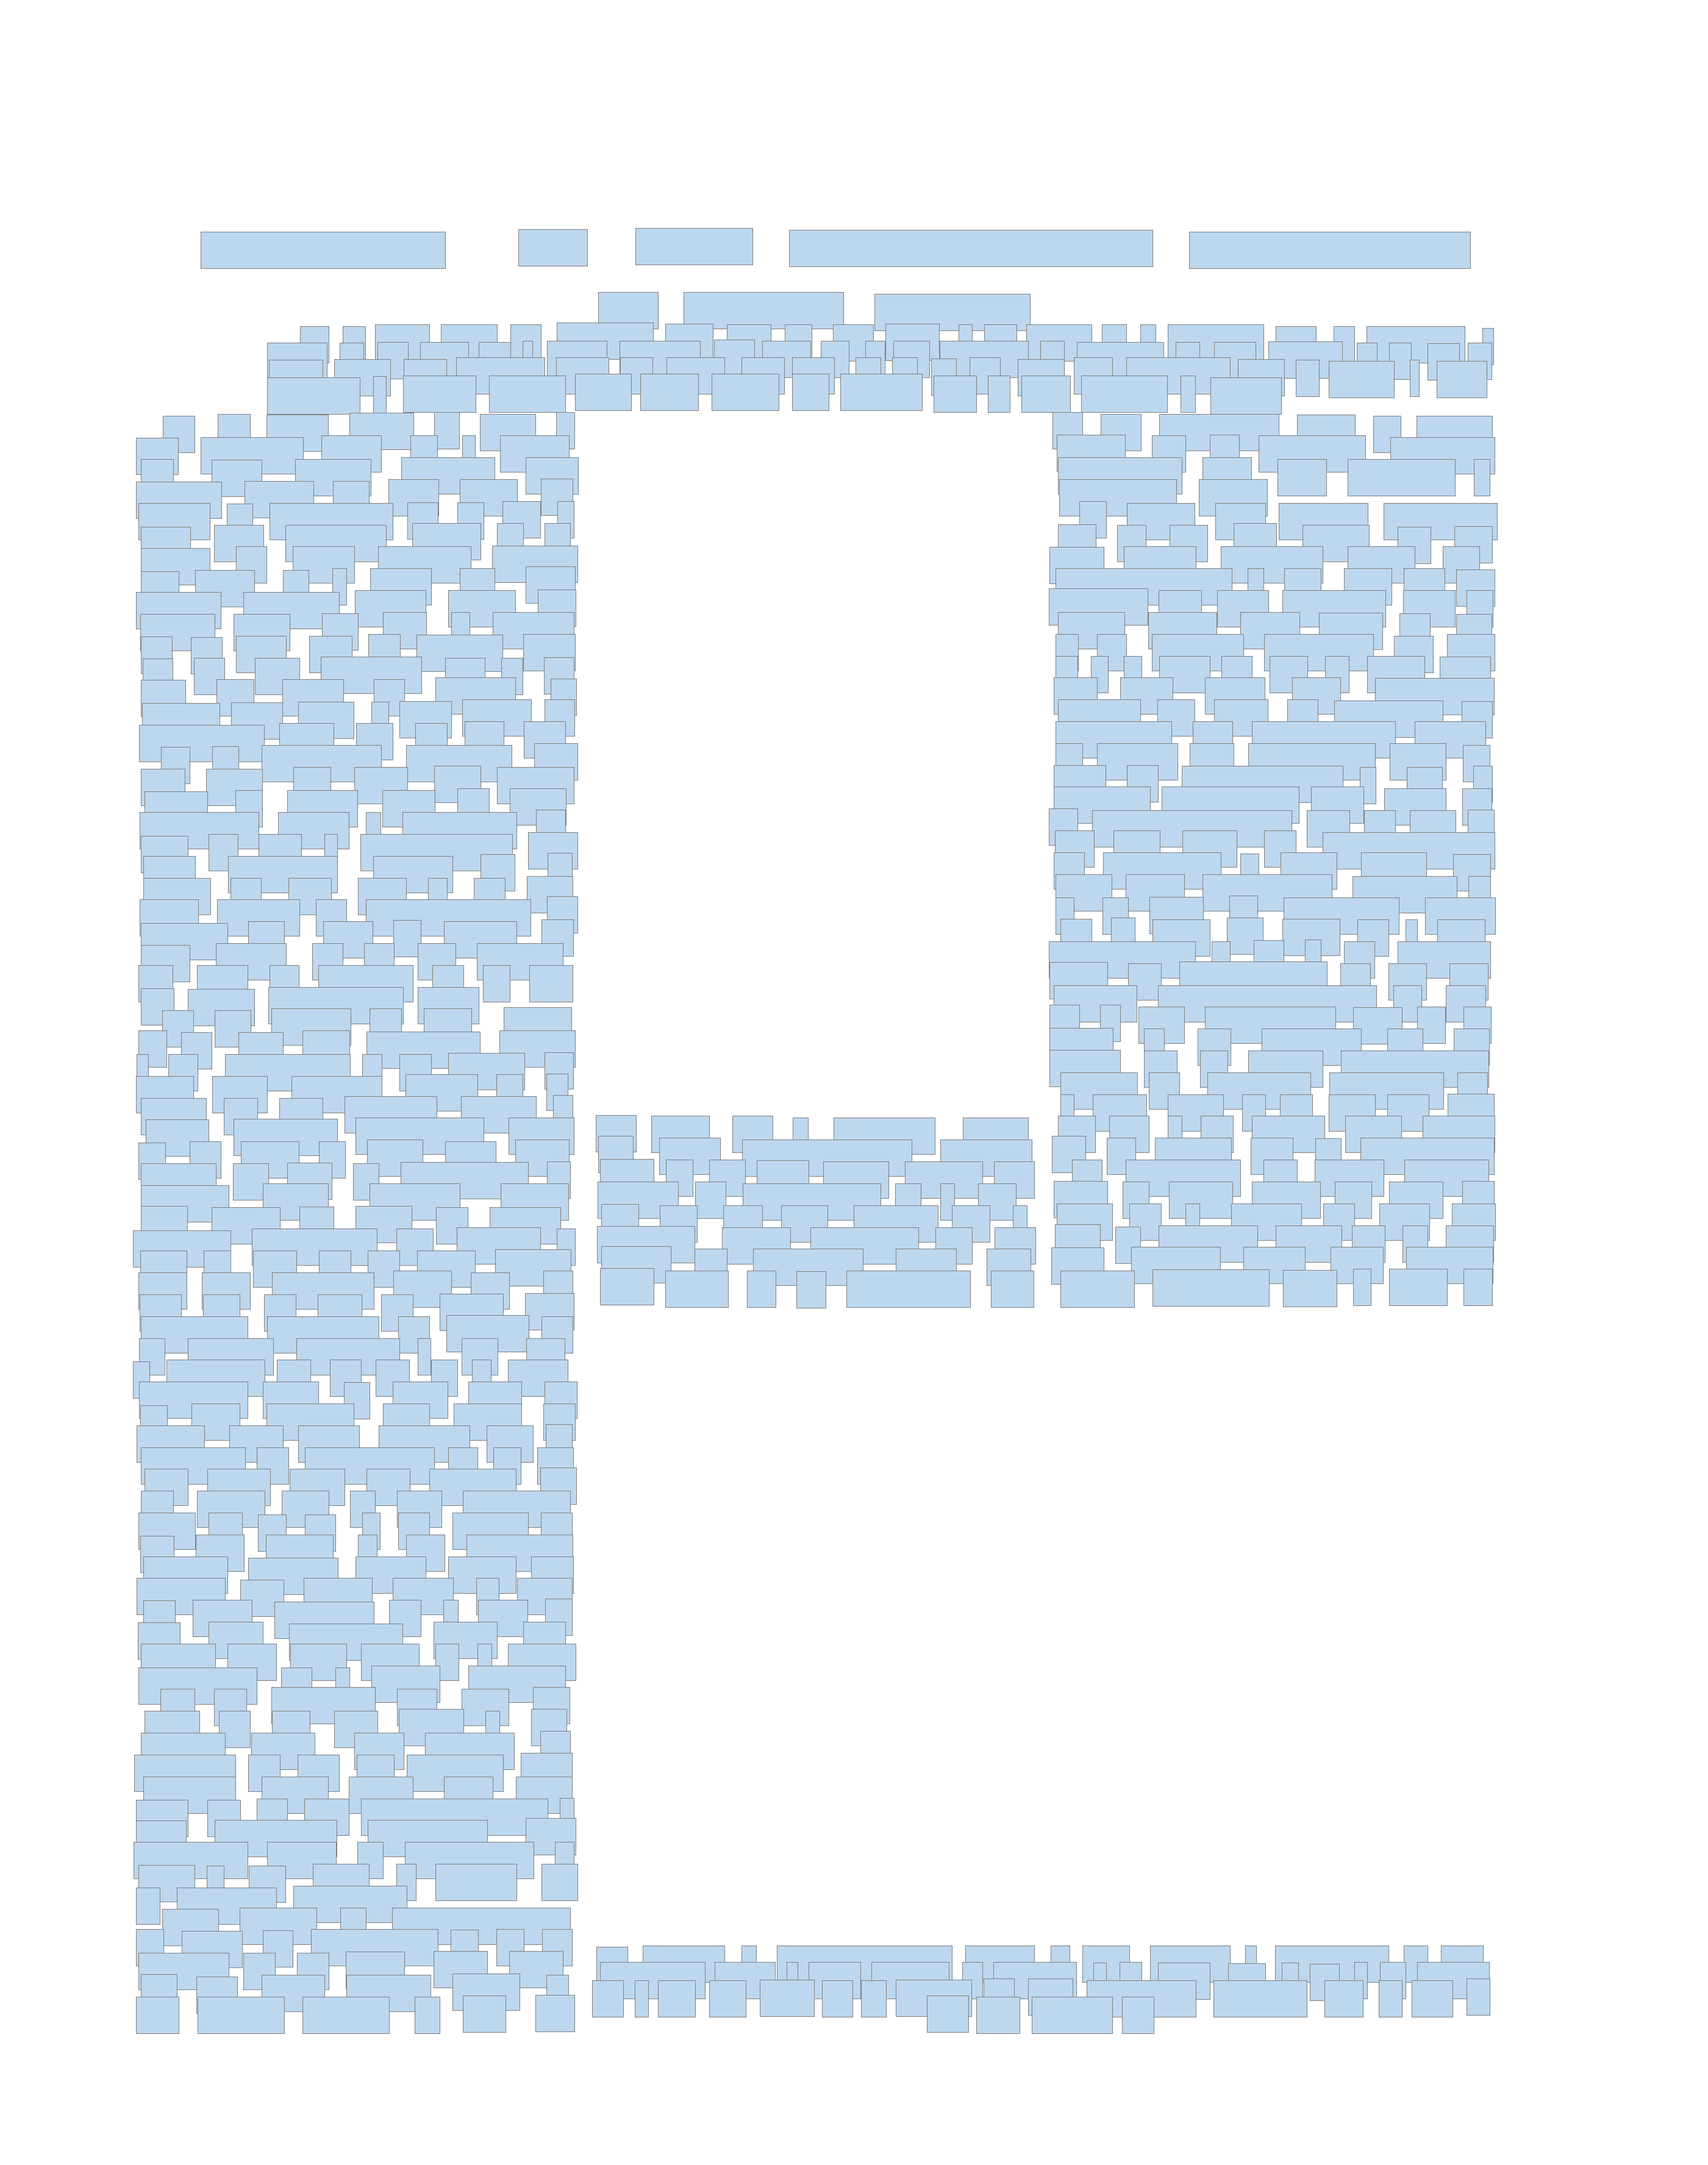 print_materials/7_word_detection.png